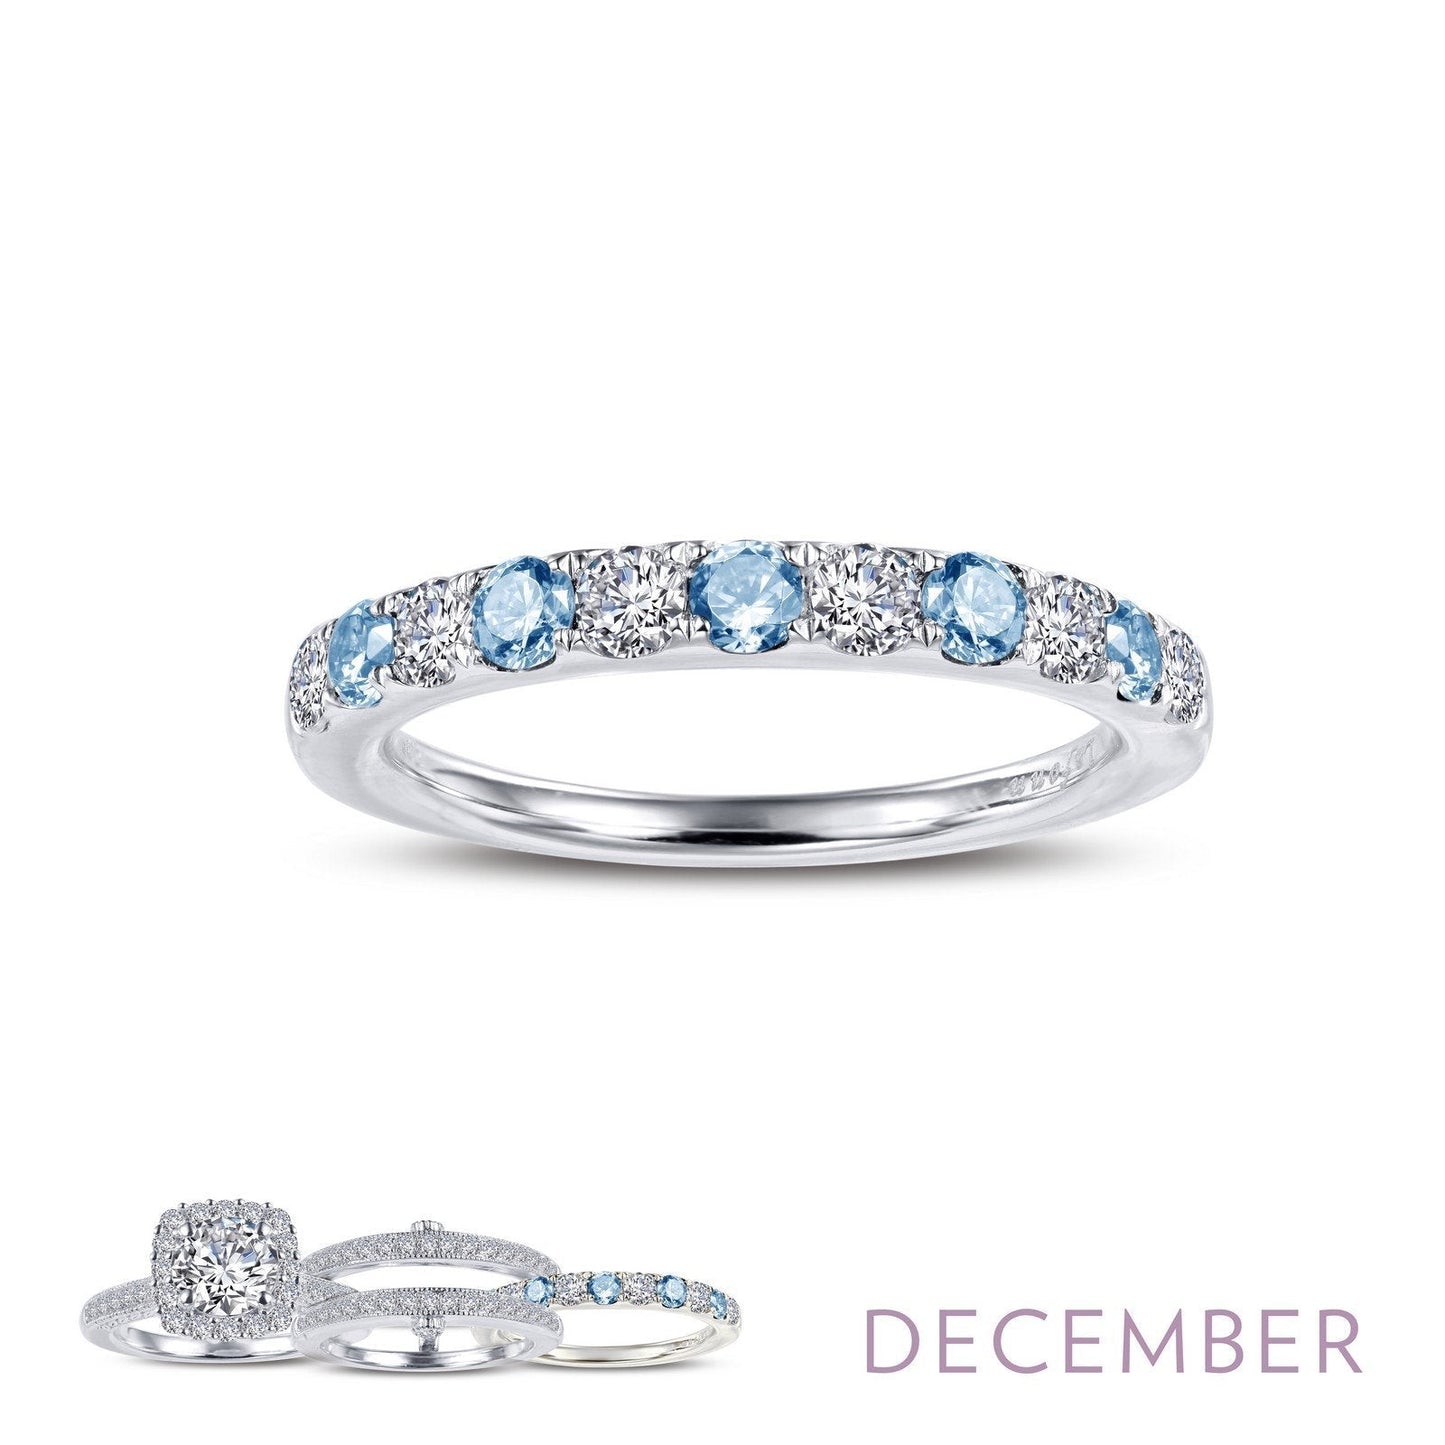 Lafonn December Birthstone Ring DECEMBER RINGS Size 8 Platinum 0.51cts CTS Approx.2.7mm(W)